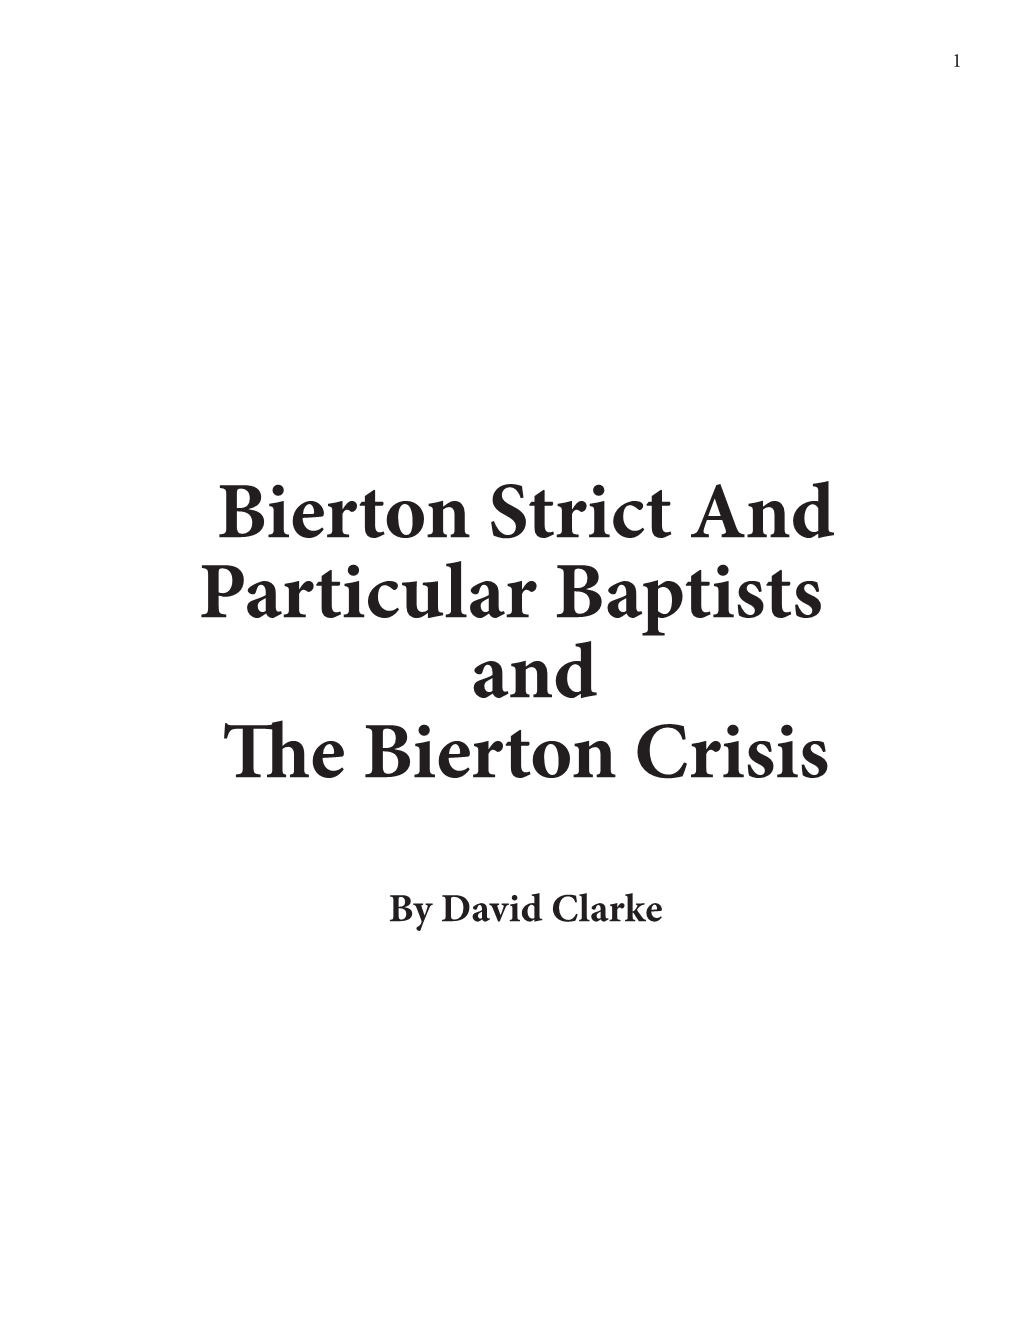 Bierton Strict and Particular Baptists and the Bierton Crisis